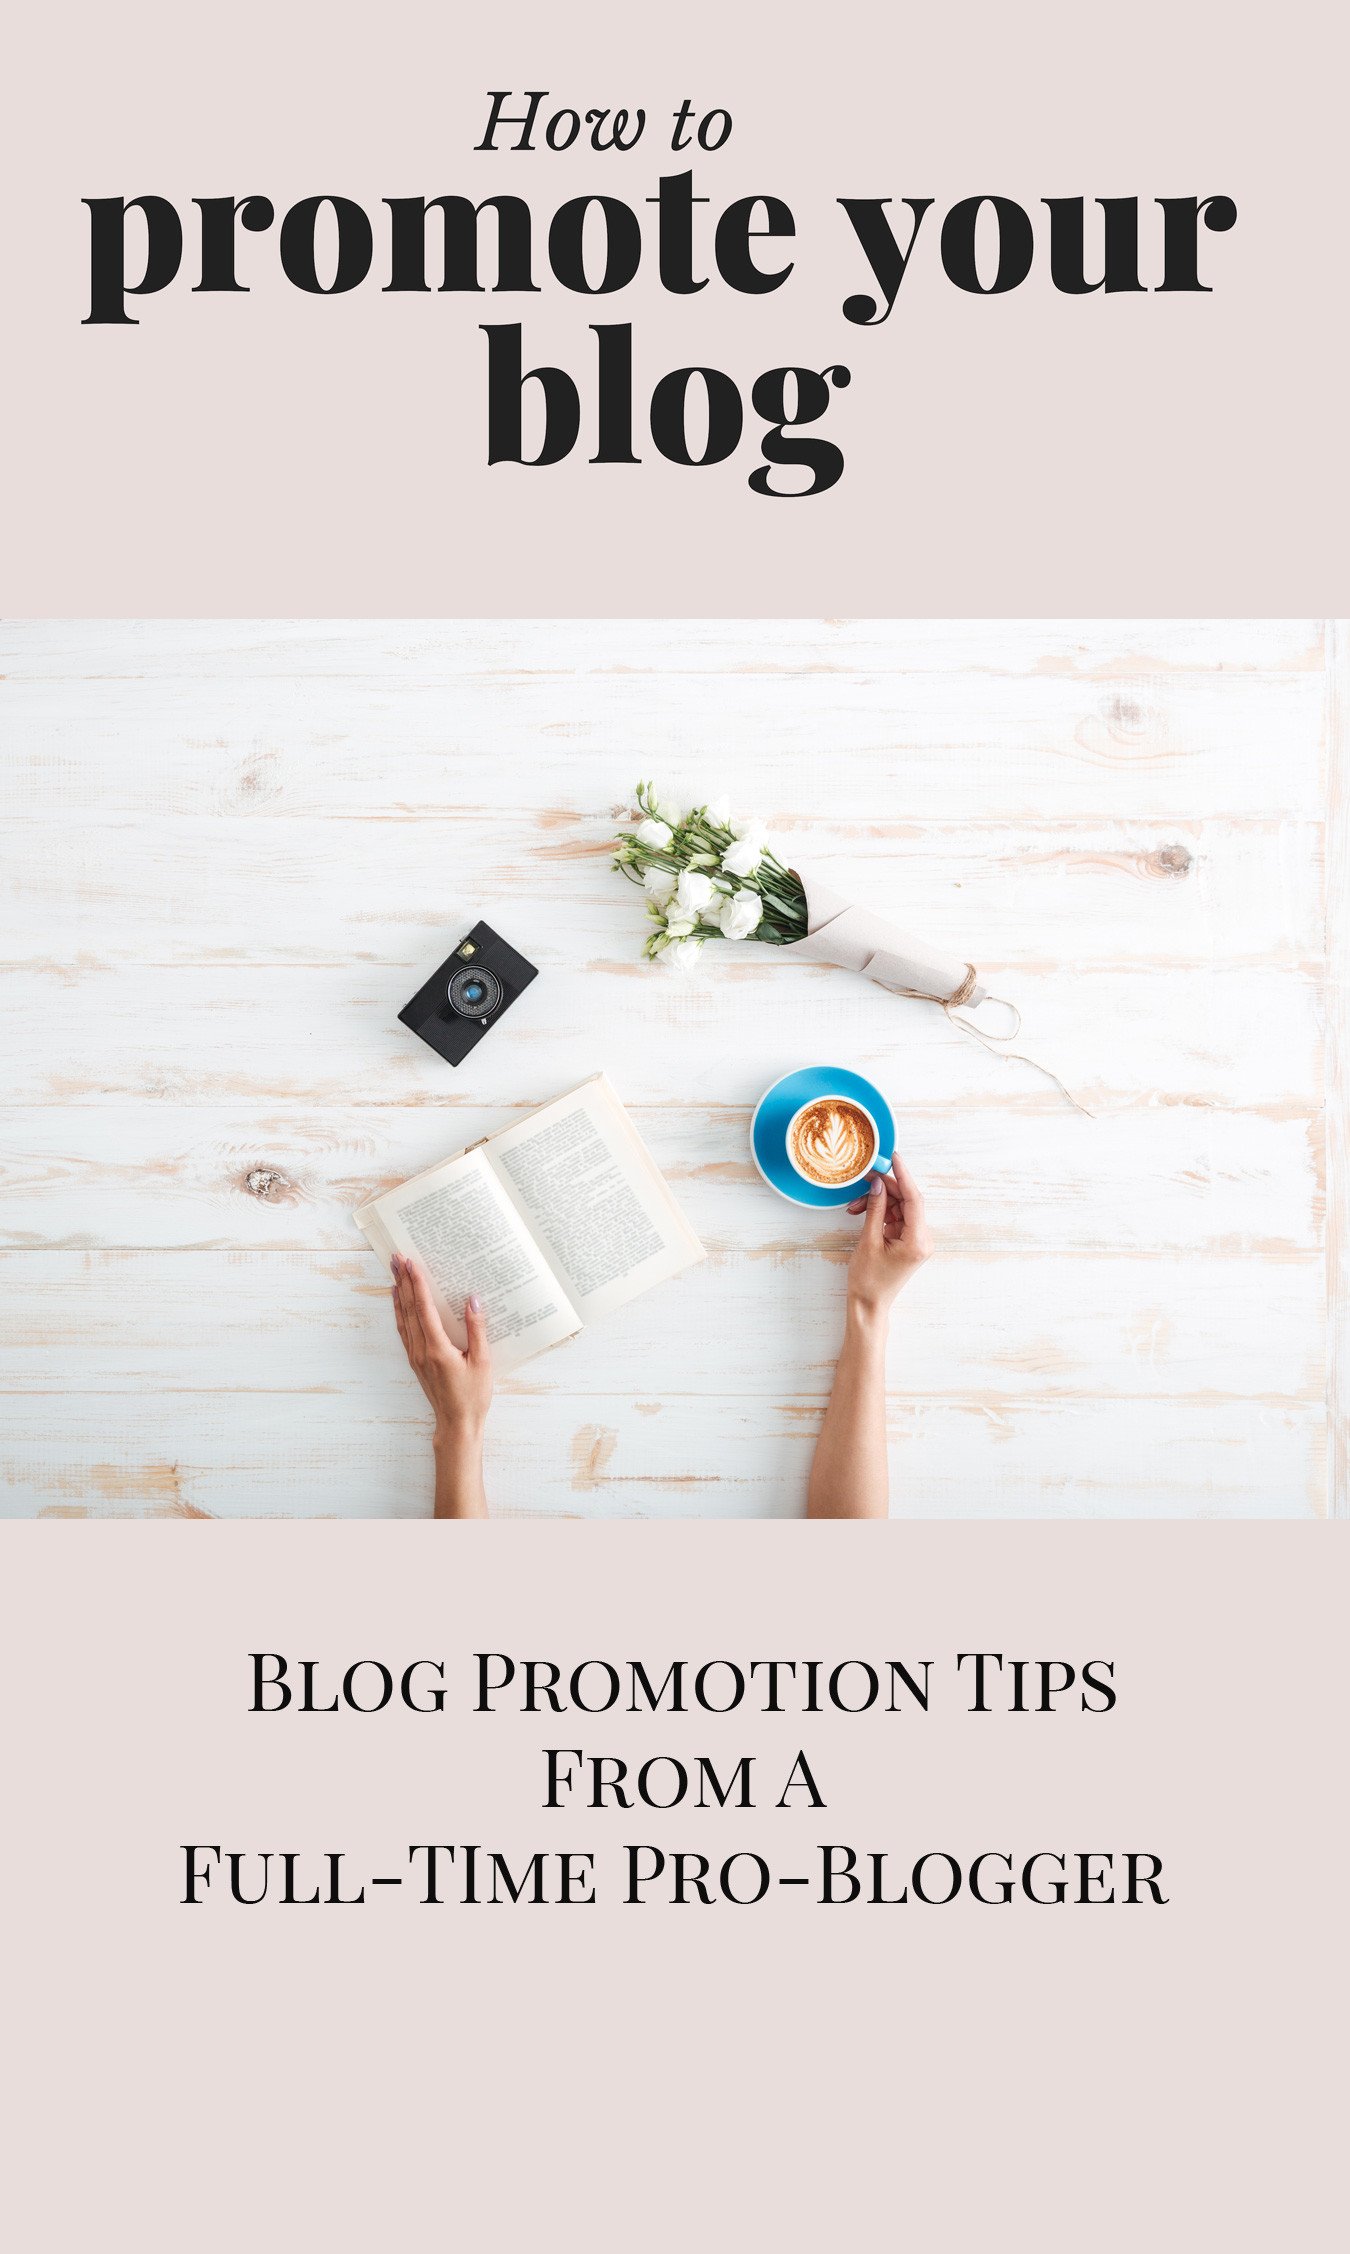 How to promote your blog: blog promotion tips that actually work, from a full-time professional blogger